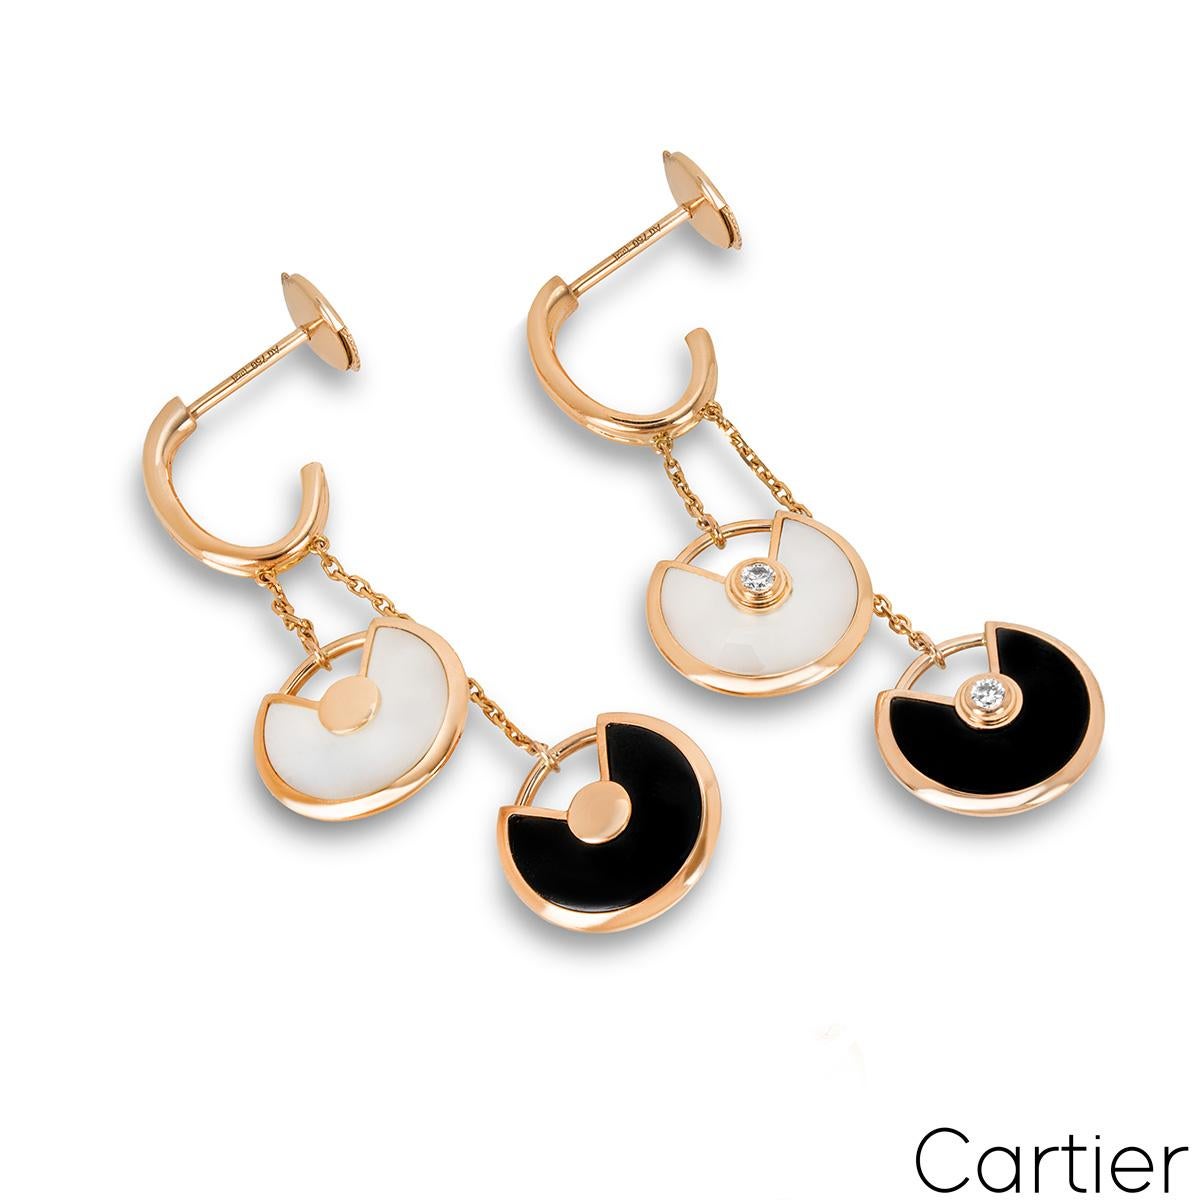 A charming pair of 18k rose gold onyx, mother of pearl and diamond earrings by Cartier from the Amulette de Cartier collection. The earrings comprise of two circular talismans suspended from a fine link chain at staggered lengths. The top talismans